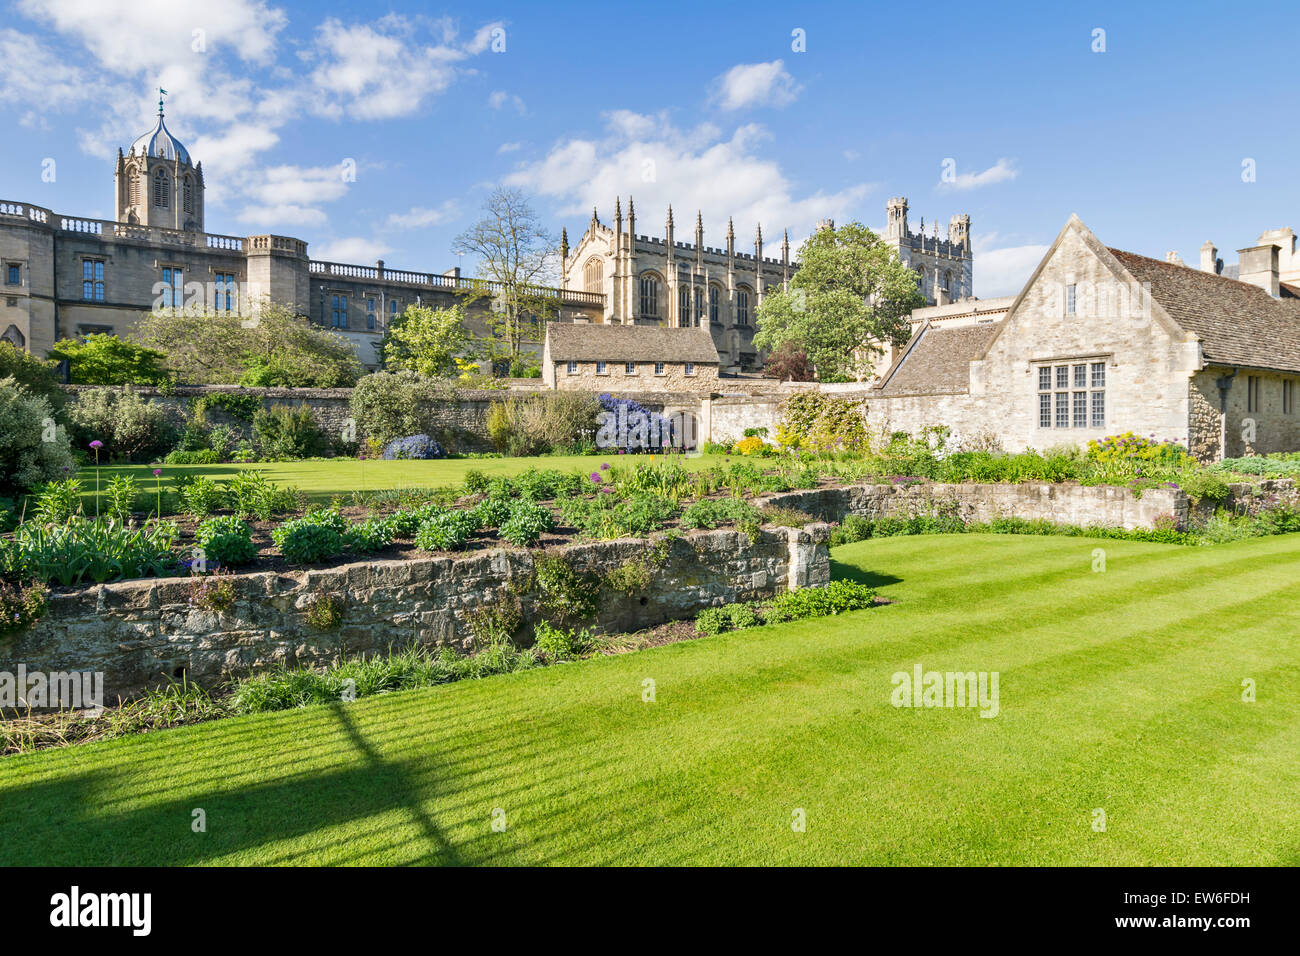 OXFORD CITY CHRIST CHURCH COLLEGE GARDENS OVERLOOKED BY THE CATHEDRAL Stock Photo